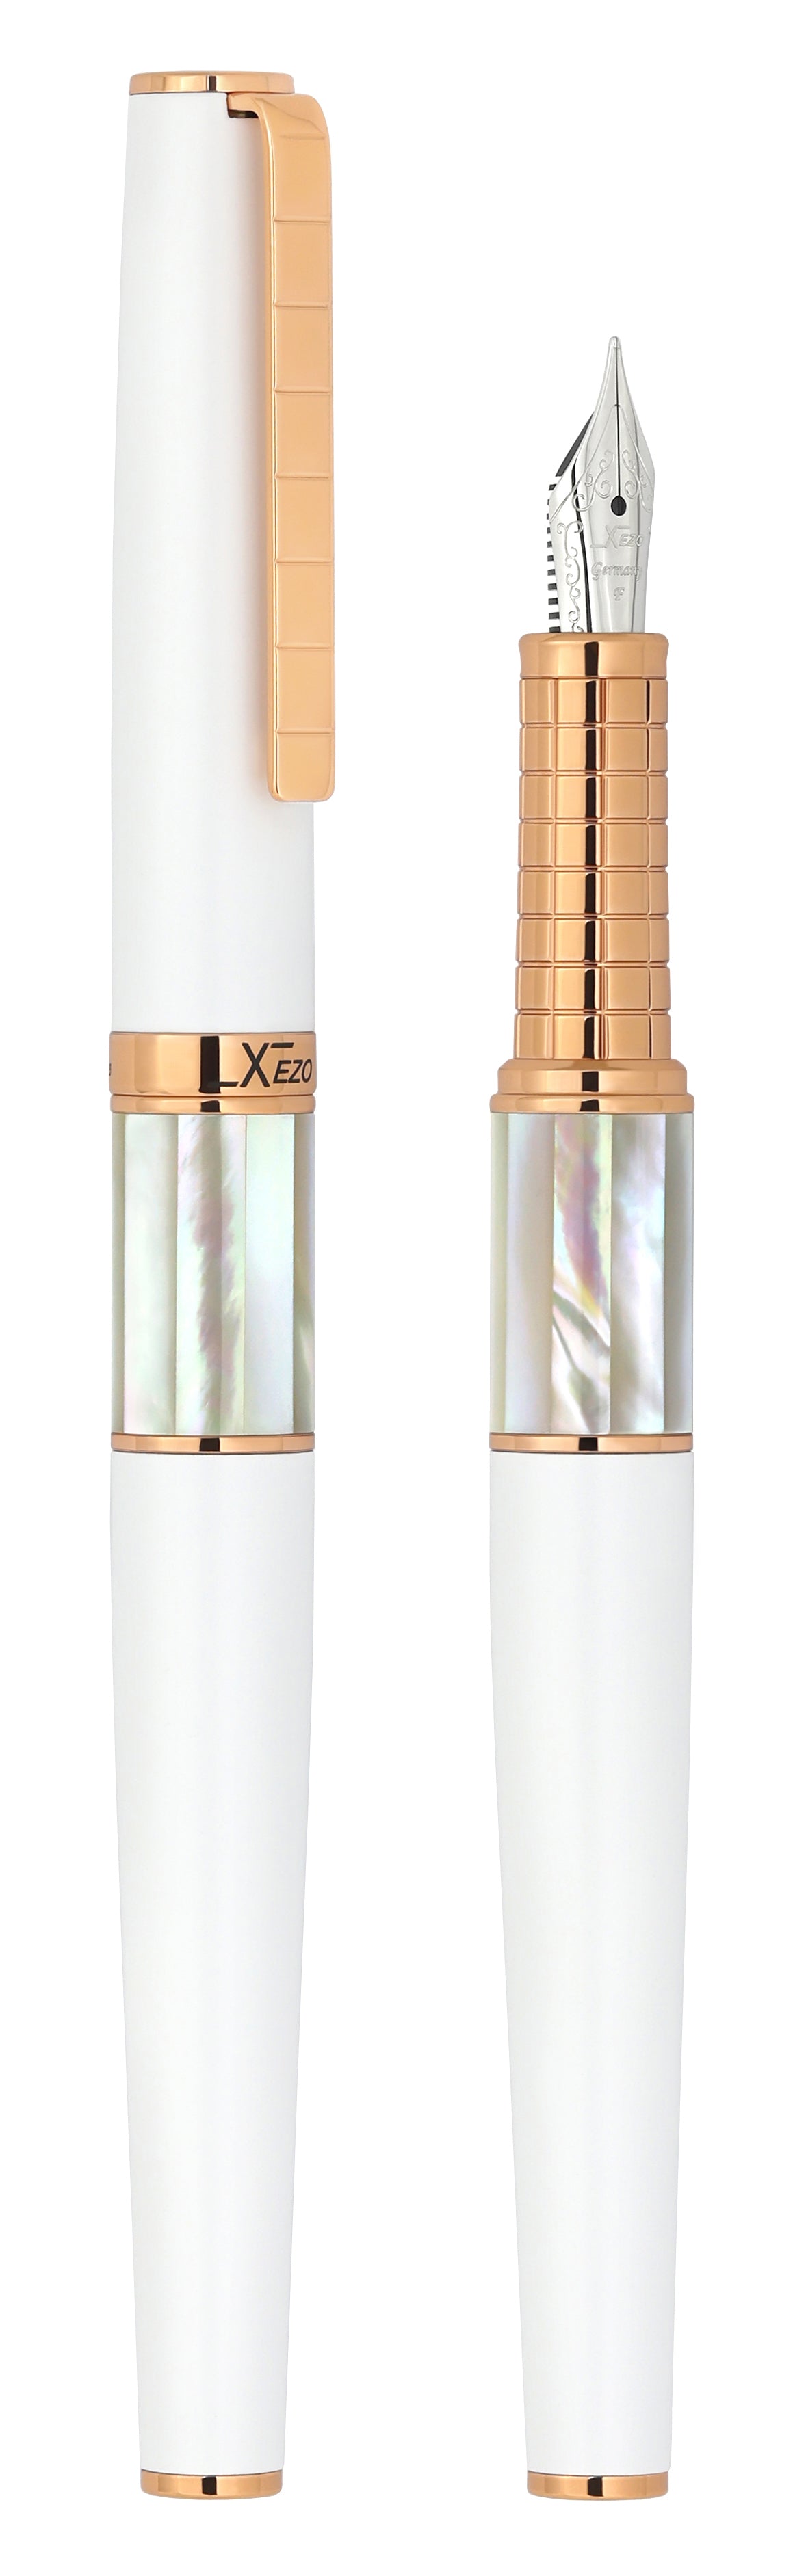 Xezo - Vertical view of two Speed Master White F-WRG Fountain pens; the one on the left is capped, and the one on the right is uncapped